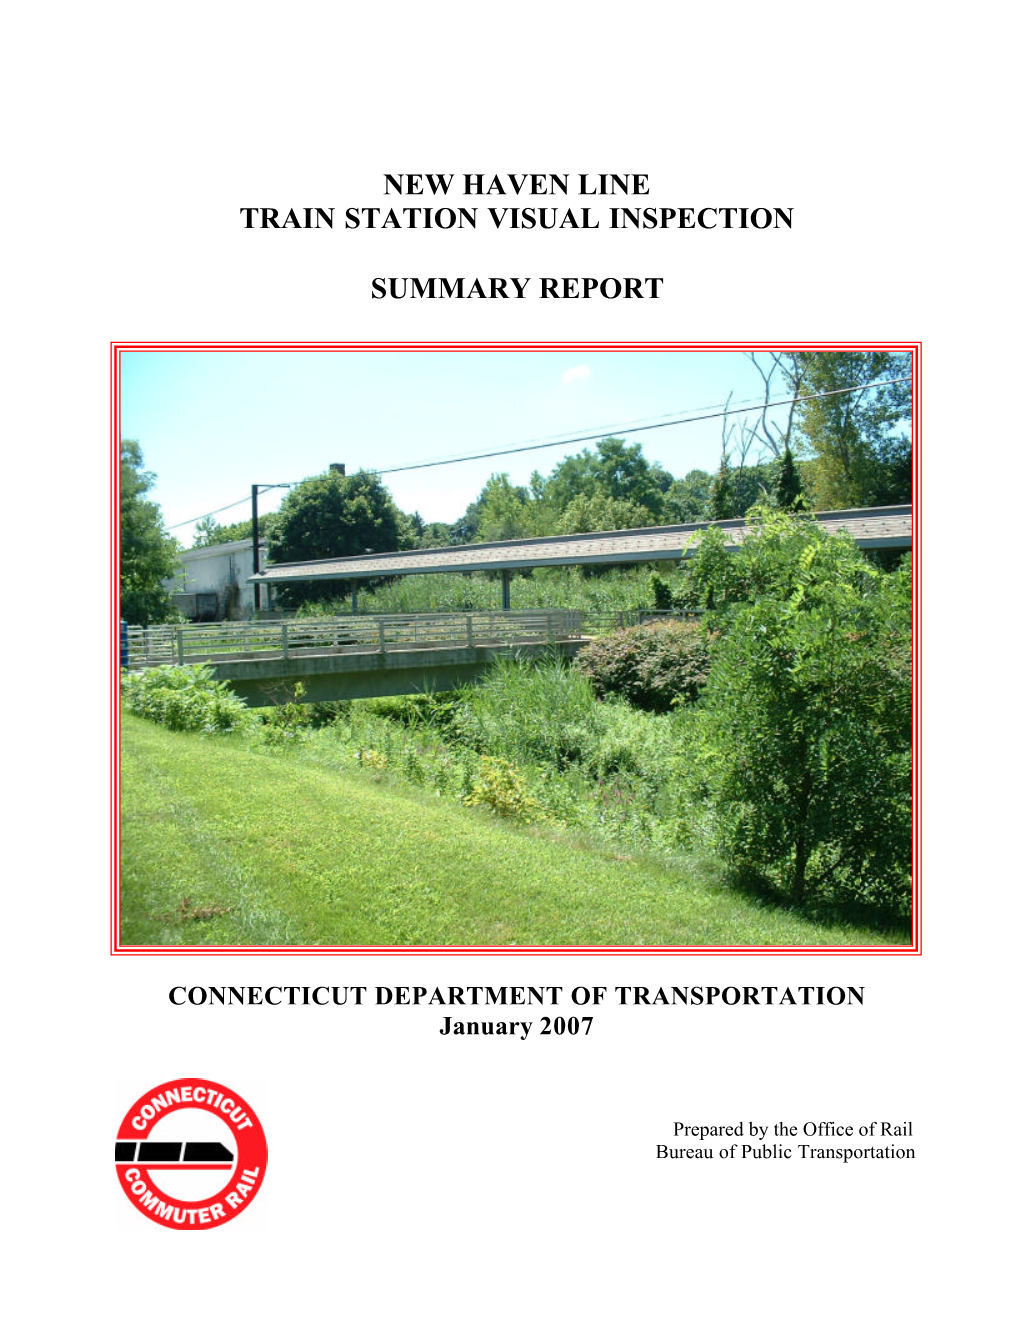 New Haven Line Train Station Visual Inspection, Summary Report